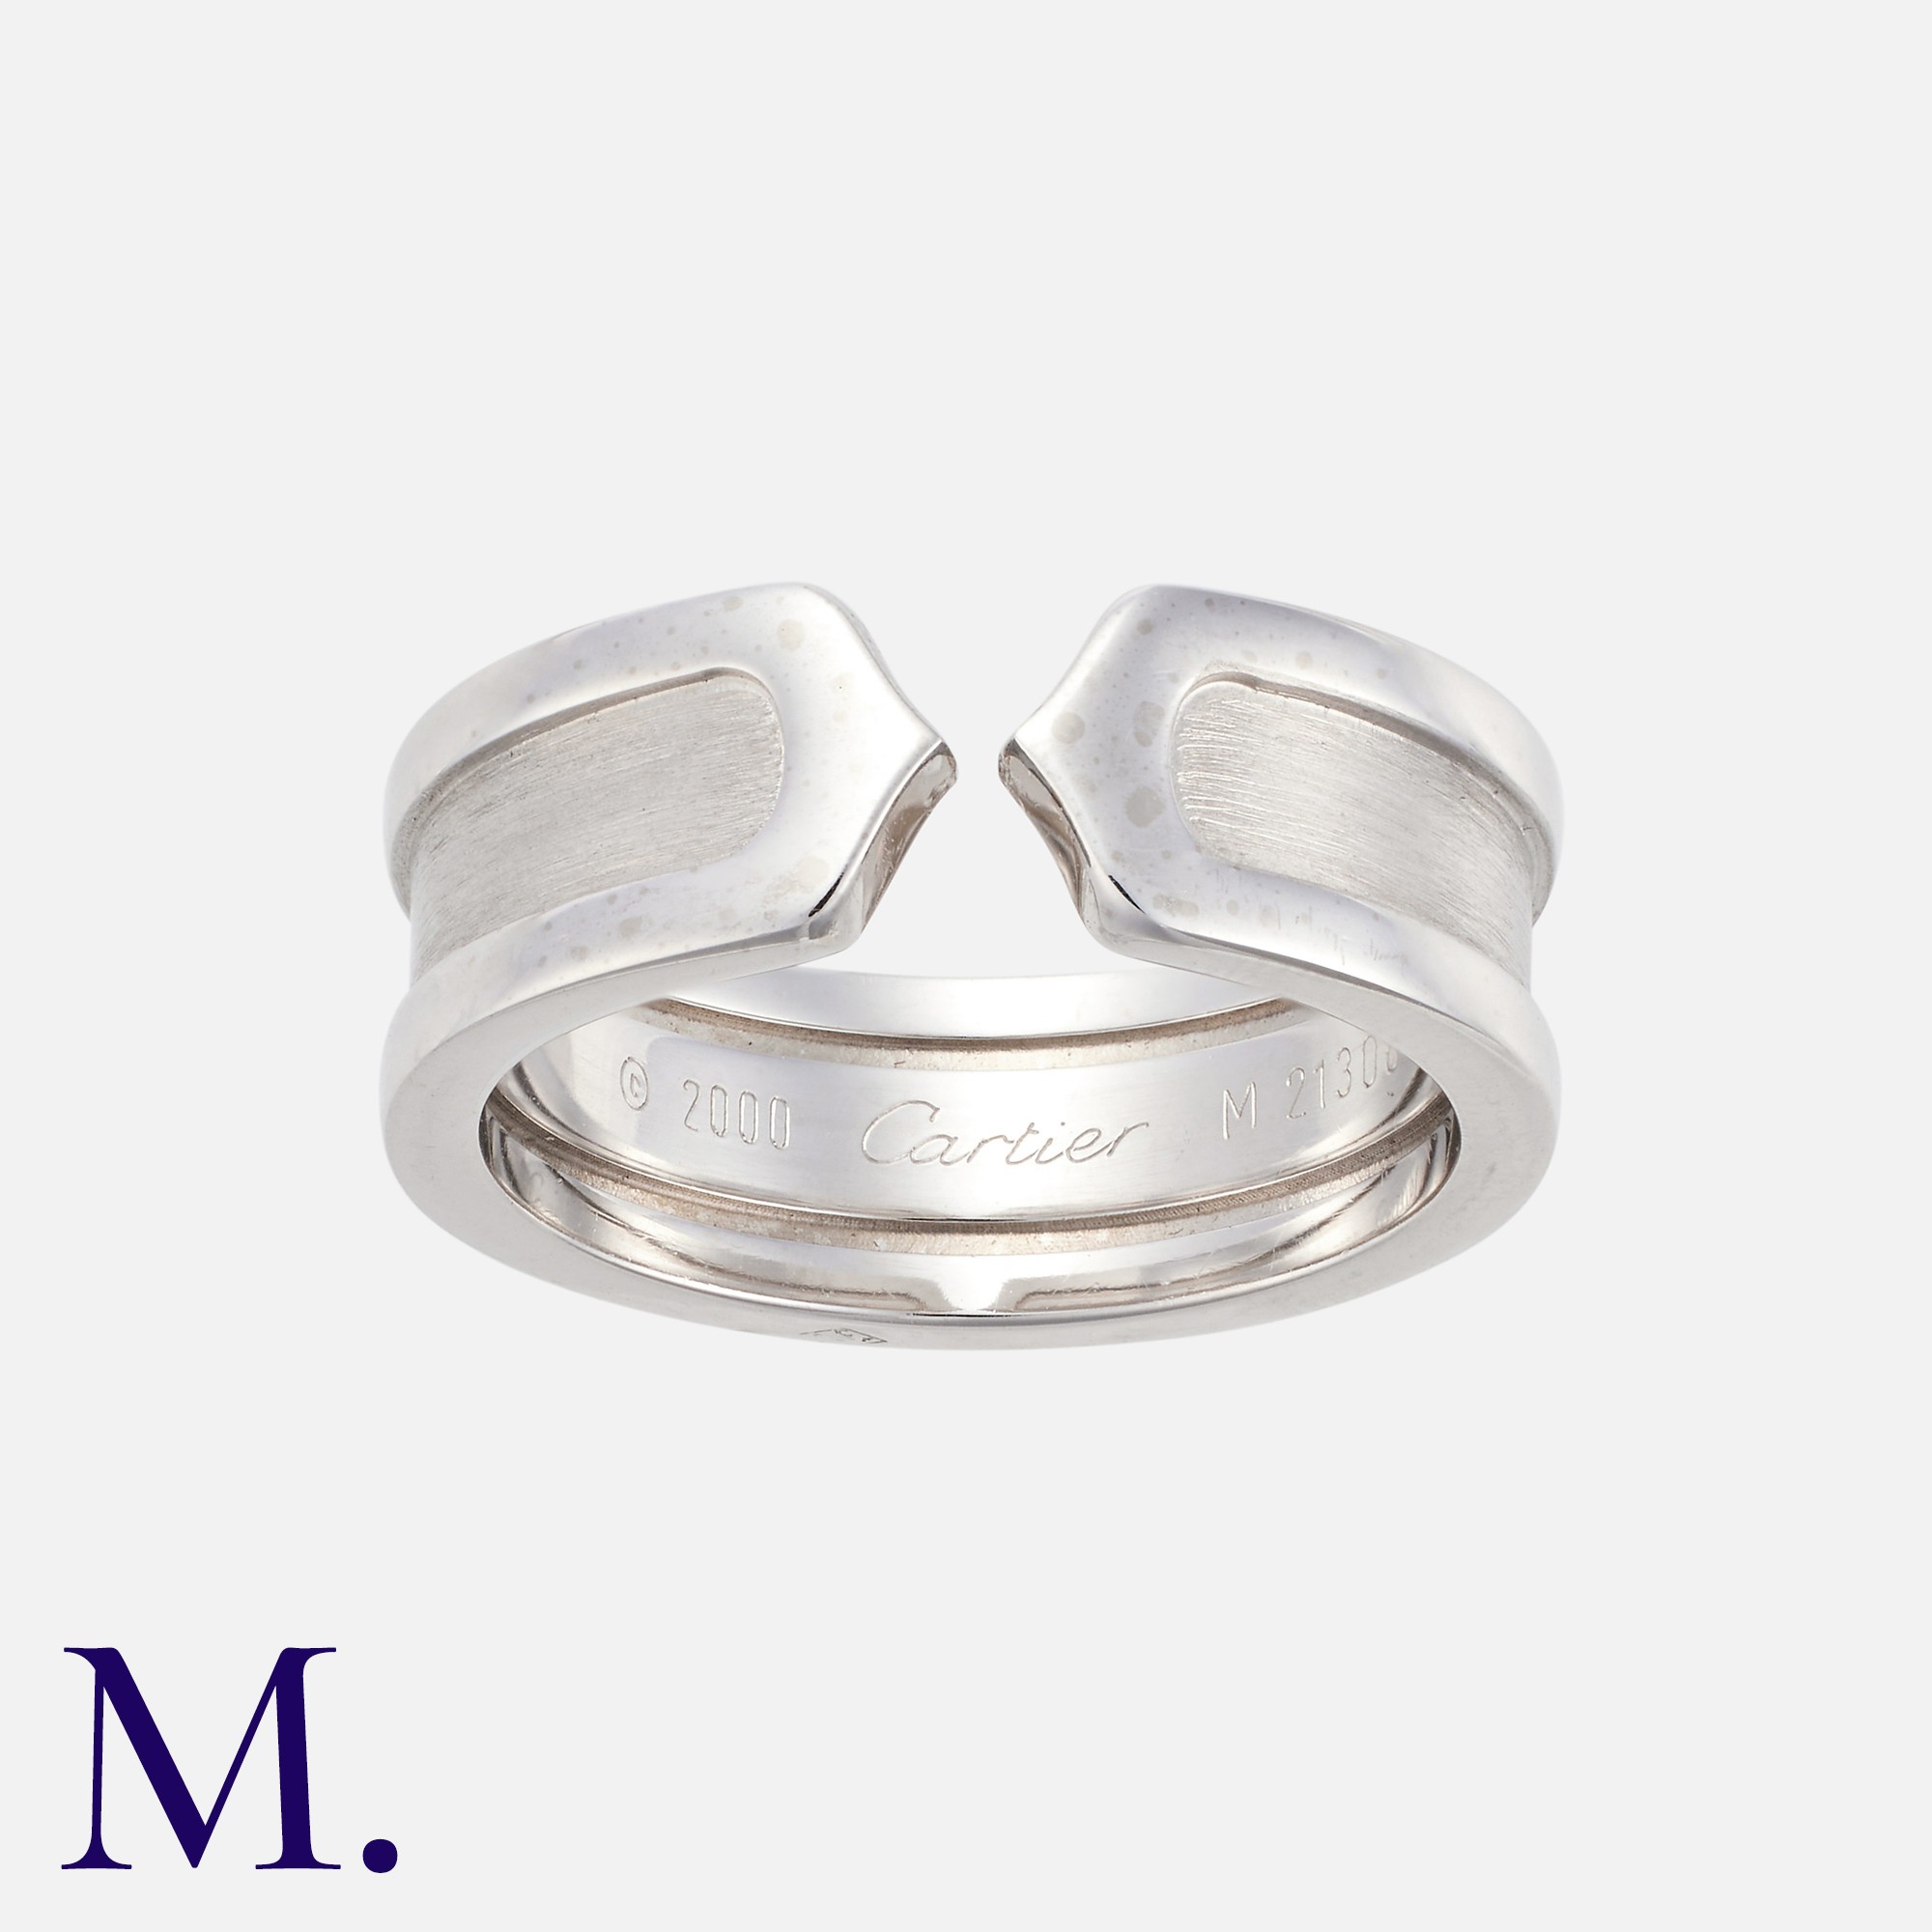 CARTIER. A 'C de Cartier' Ring in 18K white gold. Signed Cartier and marked for 18ct gold. With